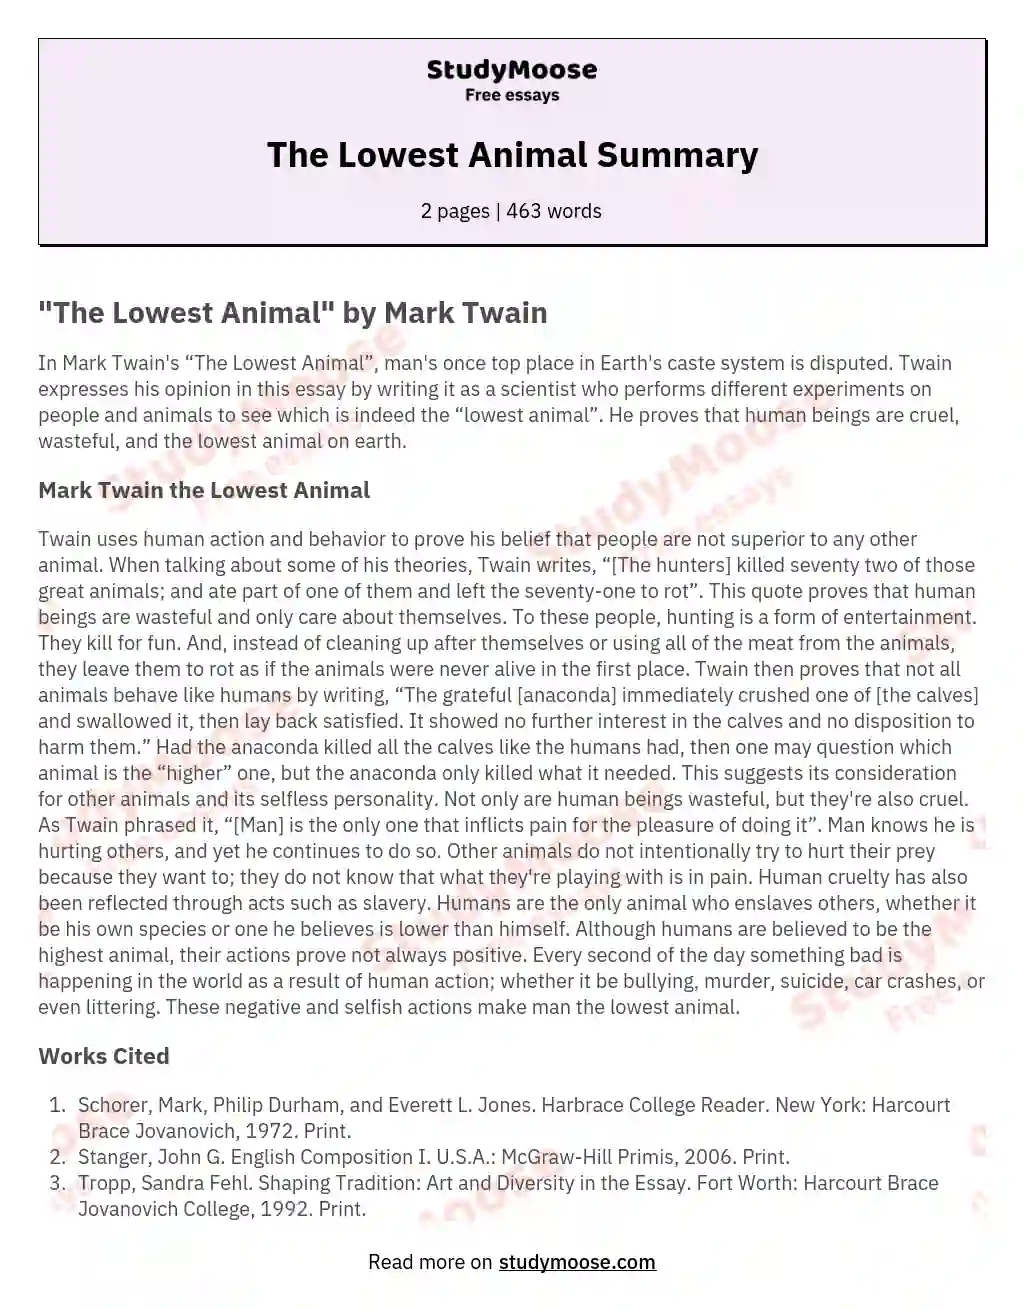 "The Lowest Animal: Challenging Human Superiority" essay